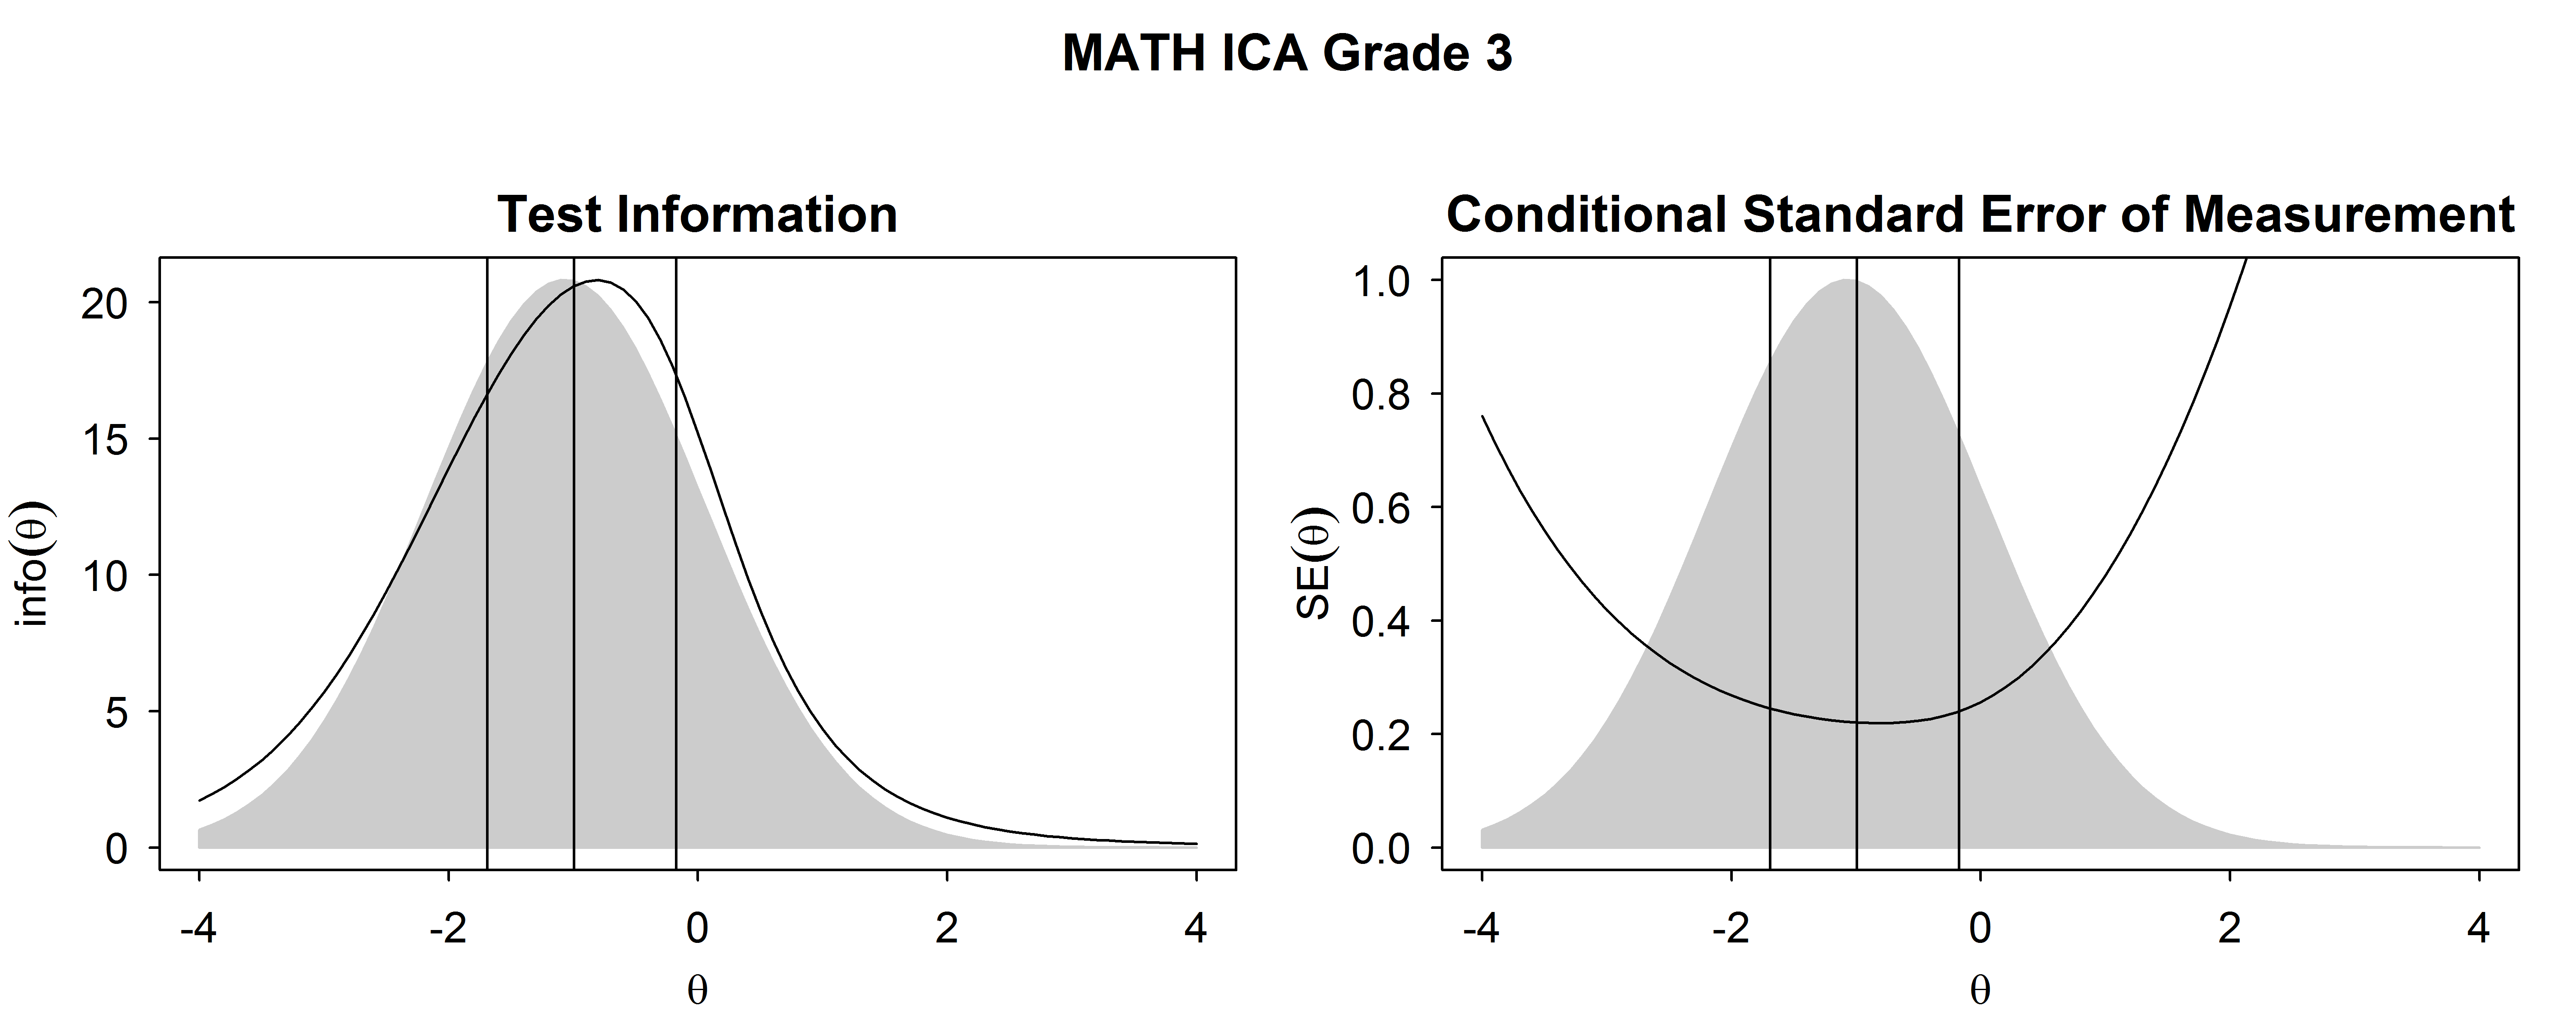 Test Information Functions and SEM For Mathematics ICA, Grade 3